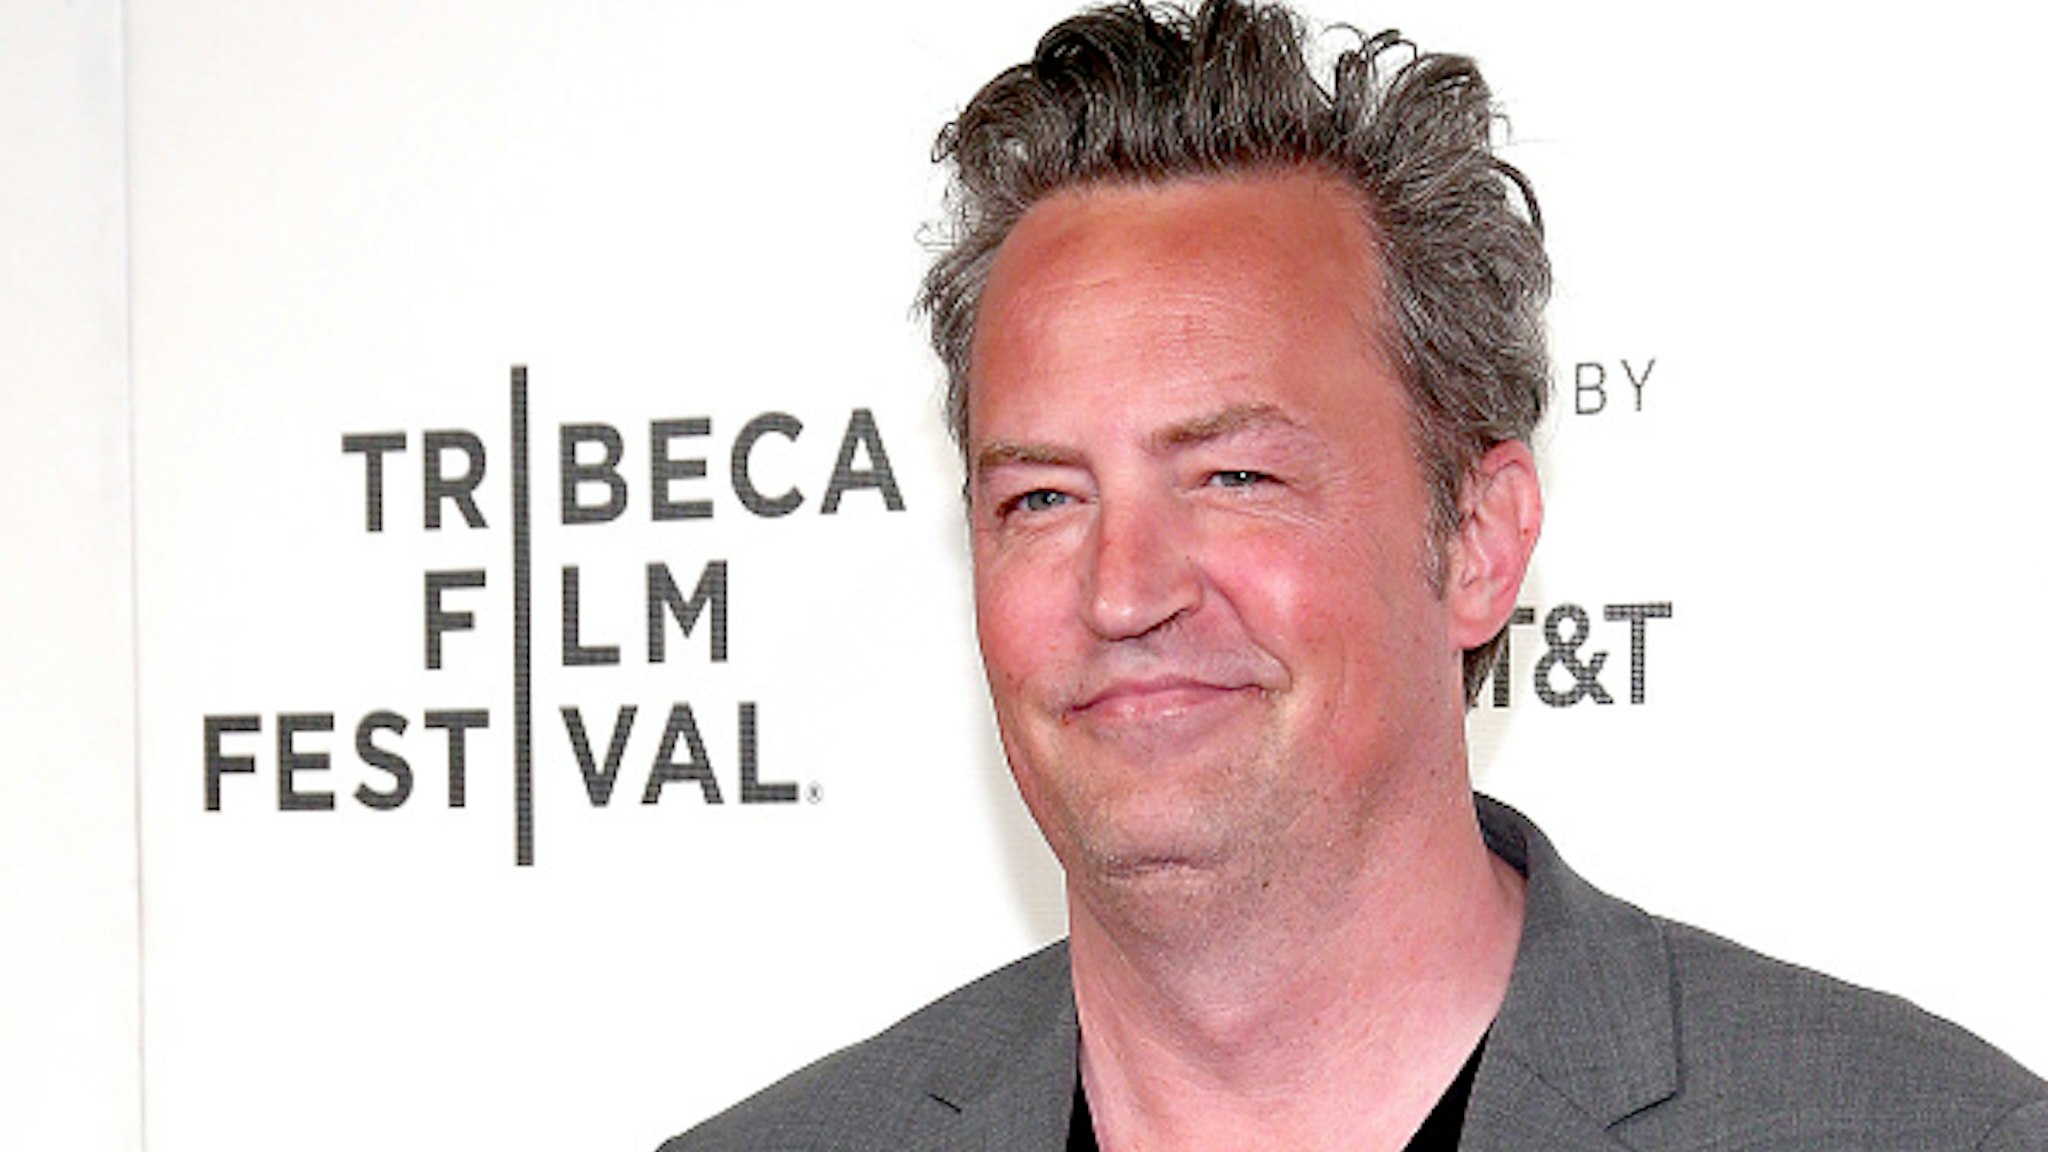 NEW YORK, NY - APRIL 26: Actor Matthew Perry attends 2017 Tribeca Film Festival - "The Circle" the at BMCC Tribeca PAC on April 26, 2017 in New York City.